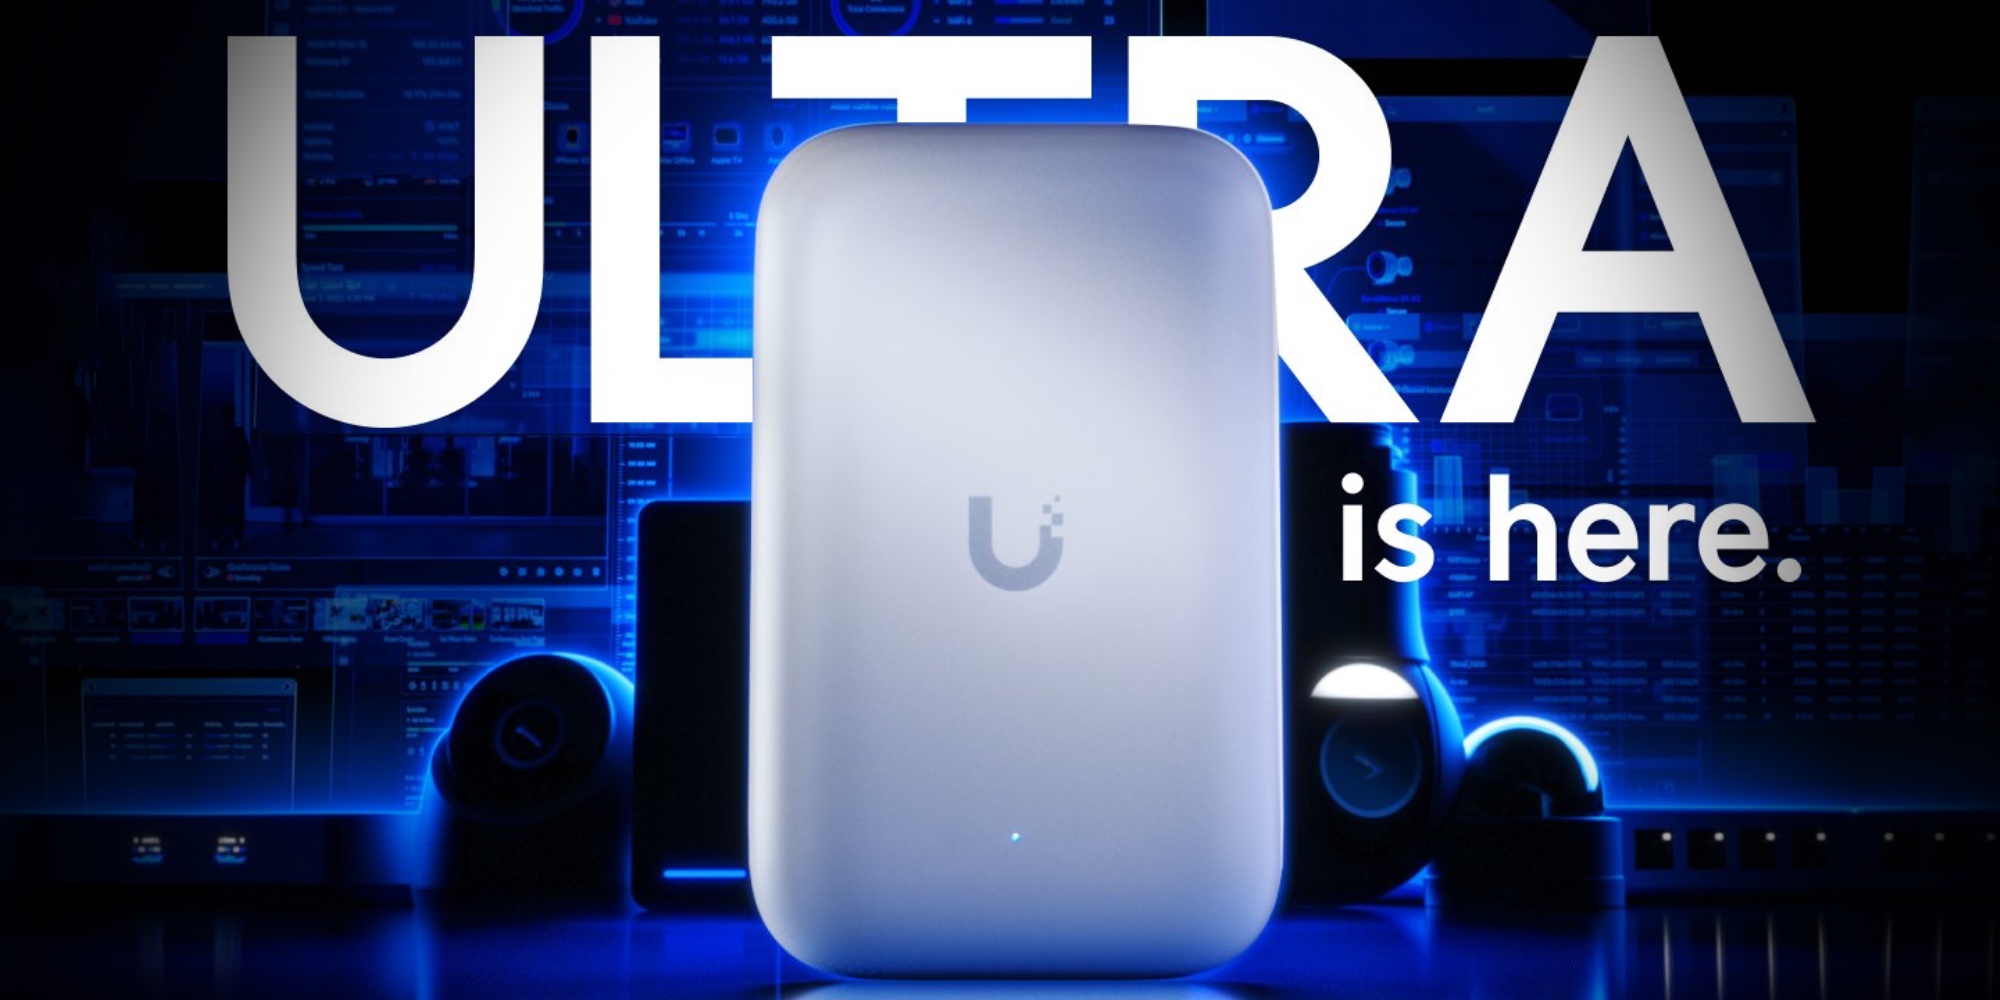 New Hardware Release: UniFi Express